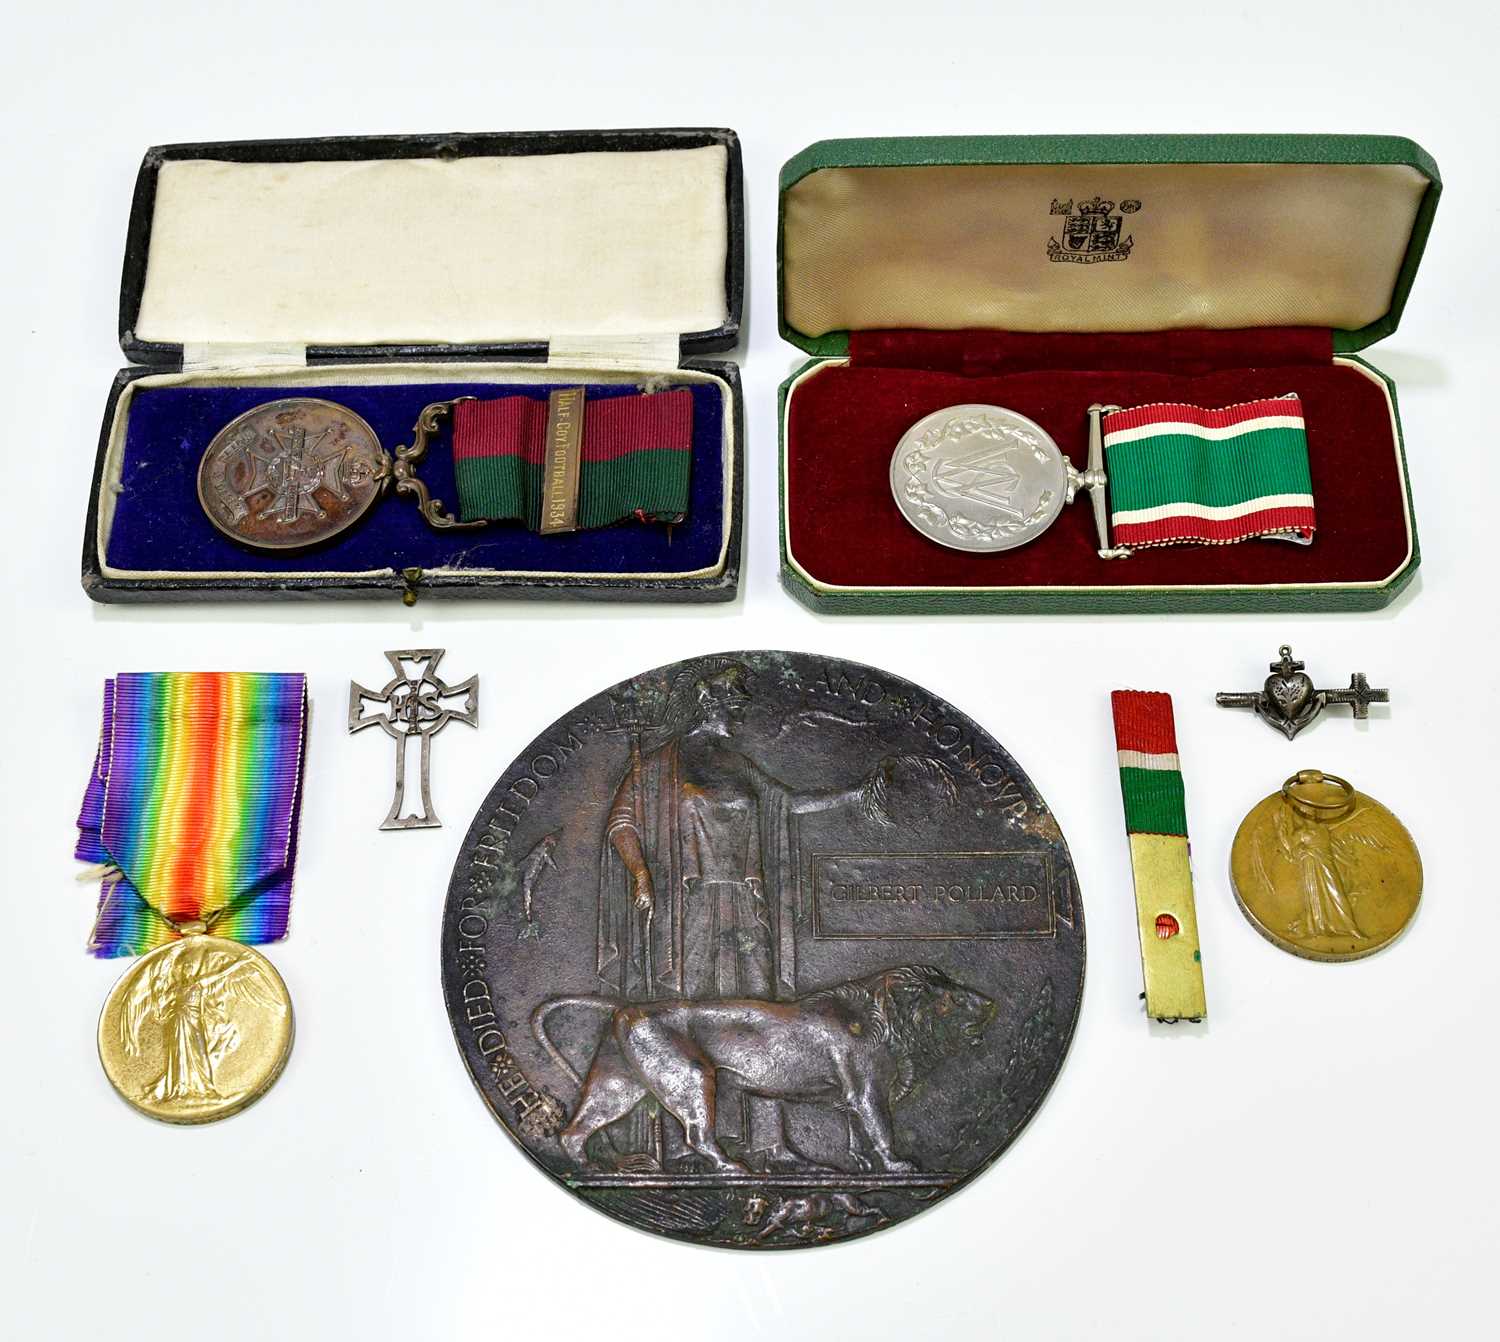 A WWI bronze memorial plaque awarded to Gilbert Pollard, together a cased Women's Voluntary